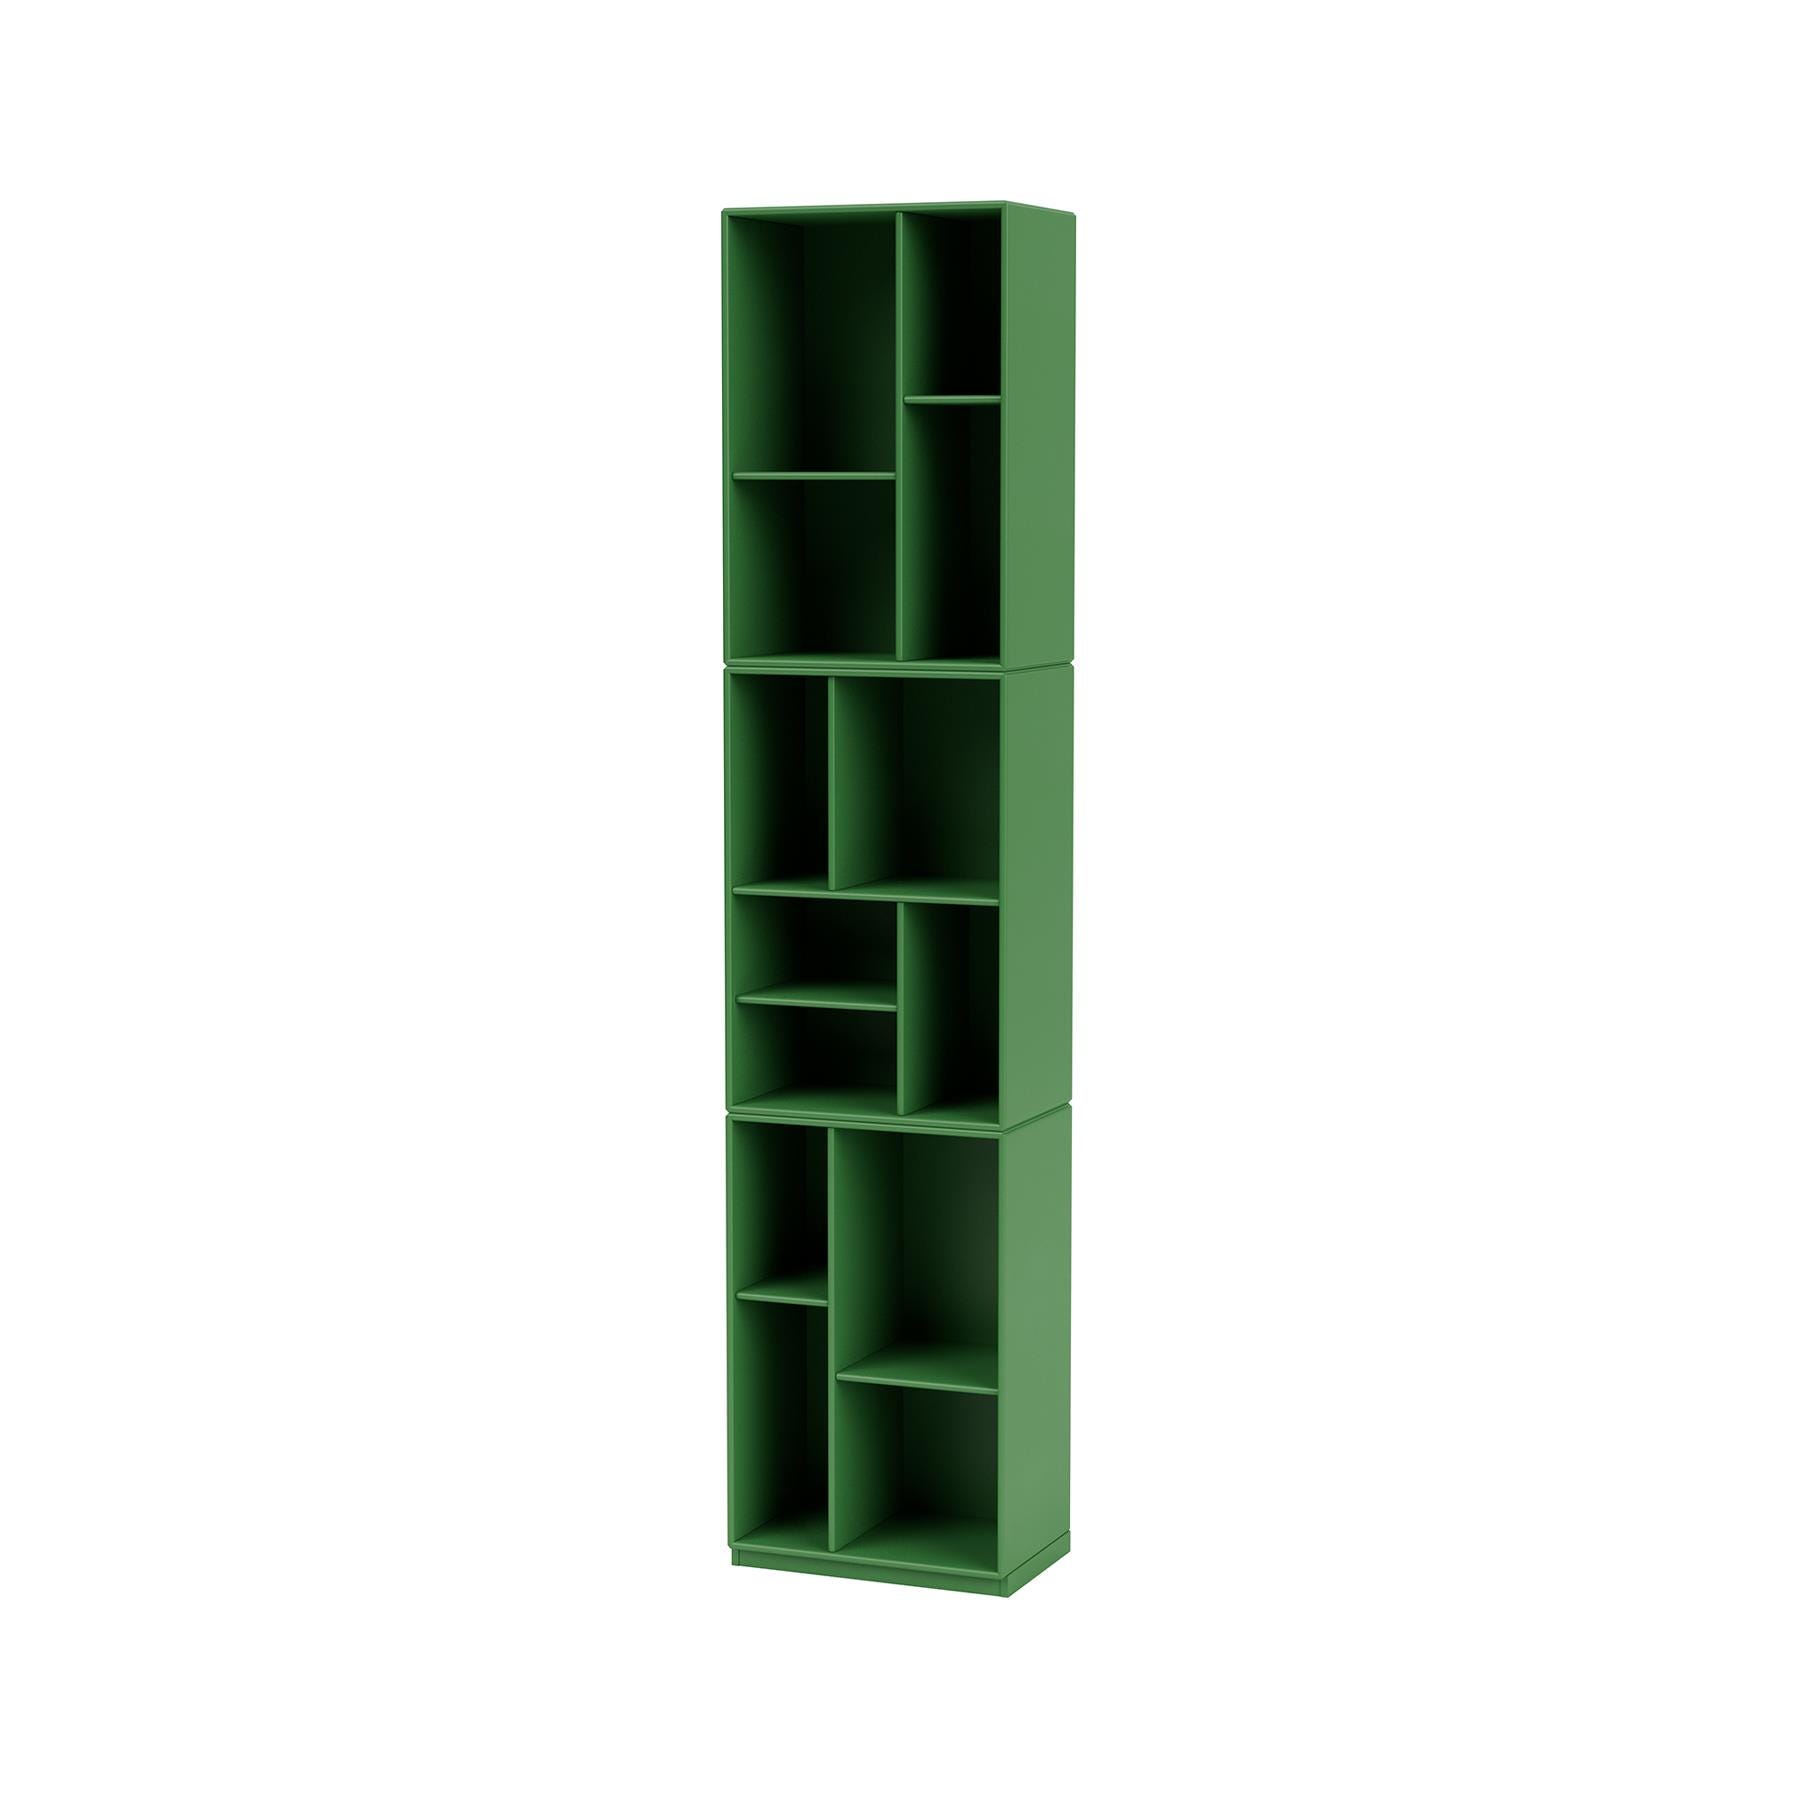 Montana Loom Slim Bookcase Parsley Green Designer Furniture From Holloways Of Ludlow